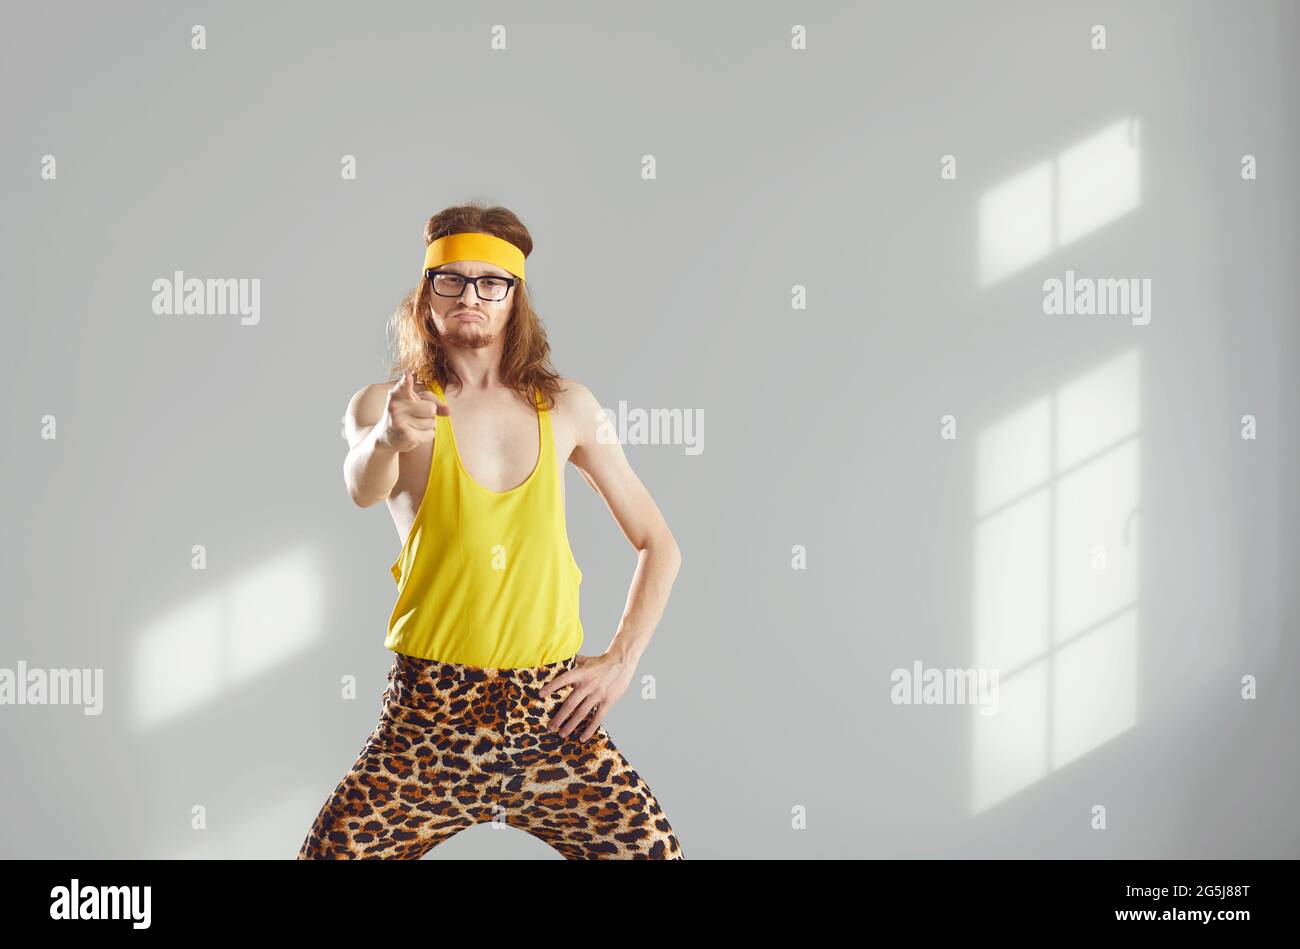 Fitness instructor in funny activewear pointing at camera with angry face expression Stock Photo